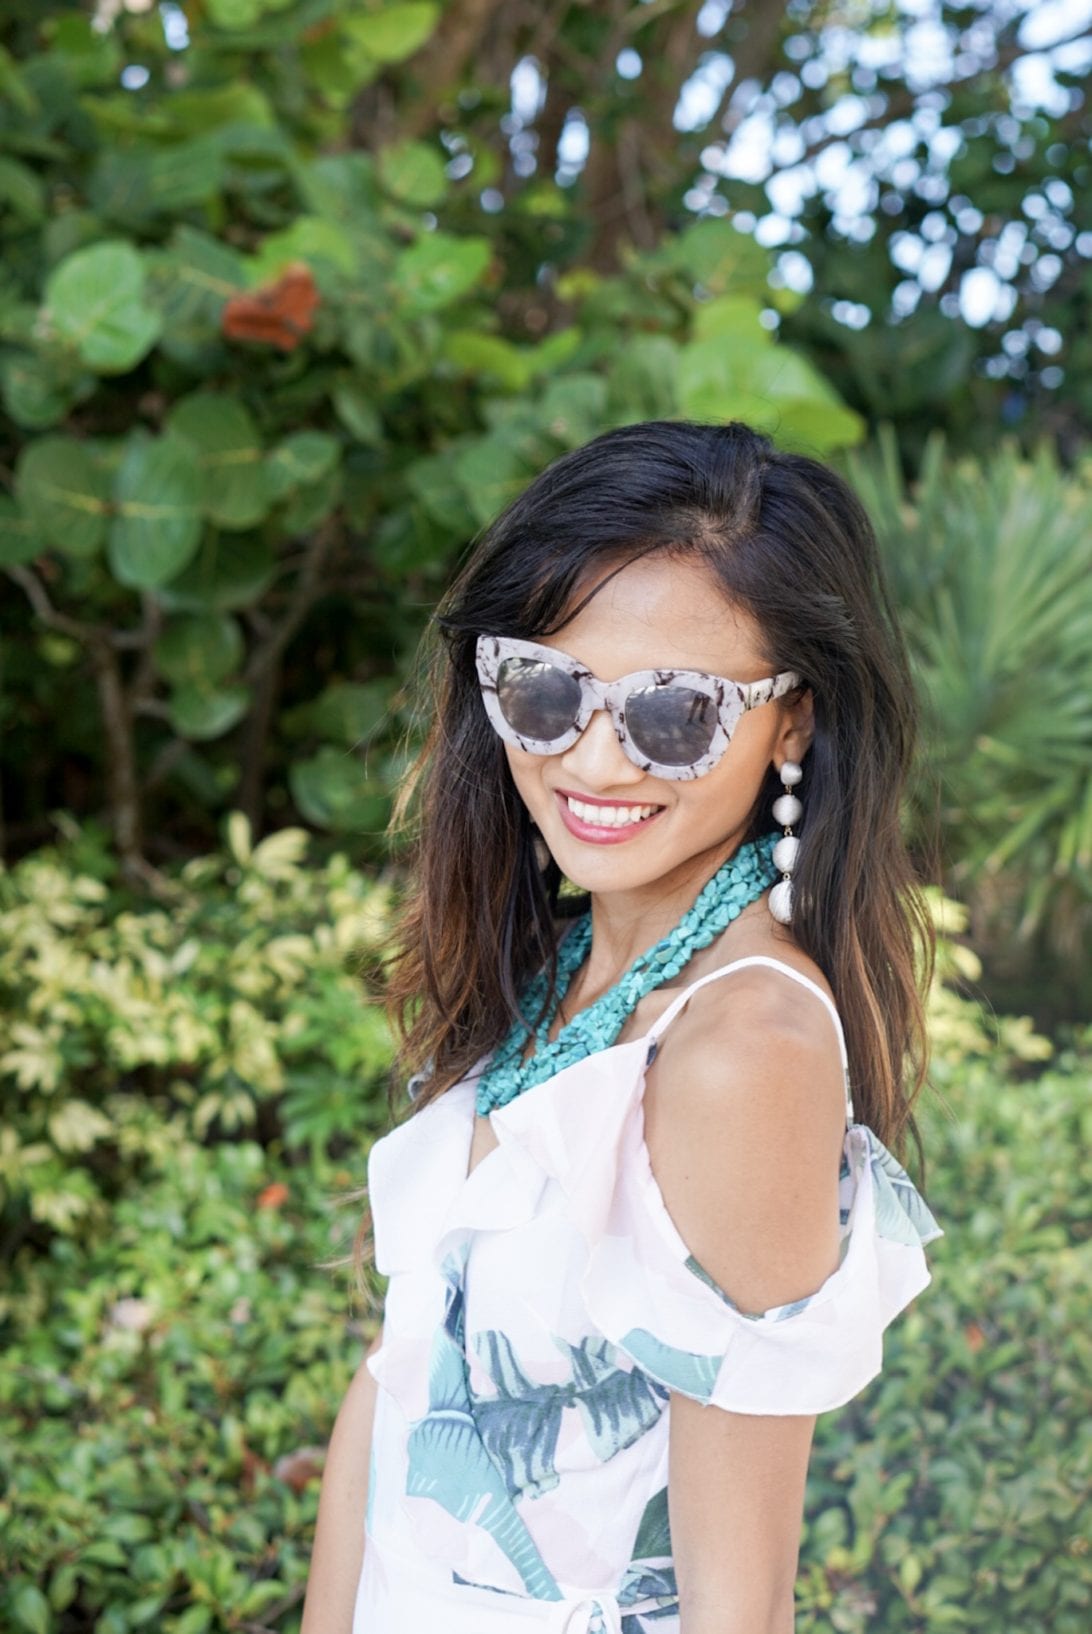 Palm Print Dress for Under $20, summer style, palm print dress, off the shoulder dress, monogrammed bag, turquoise necklace, quay sunglasses, vacation style